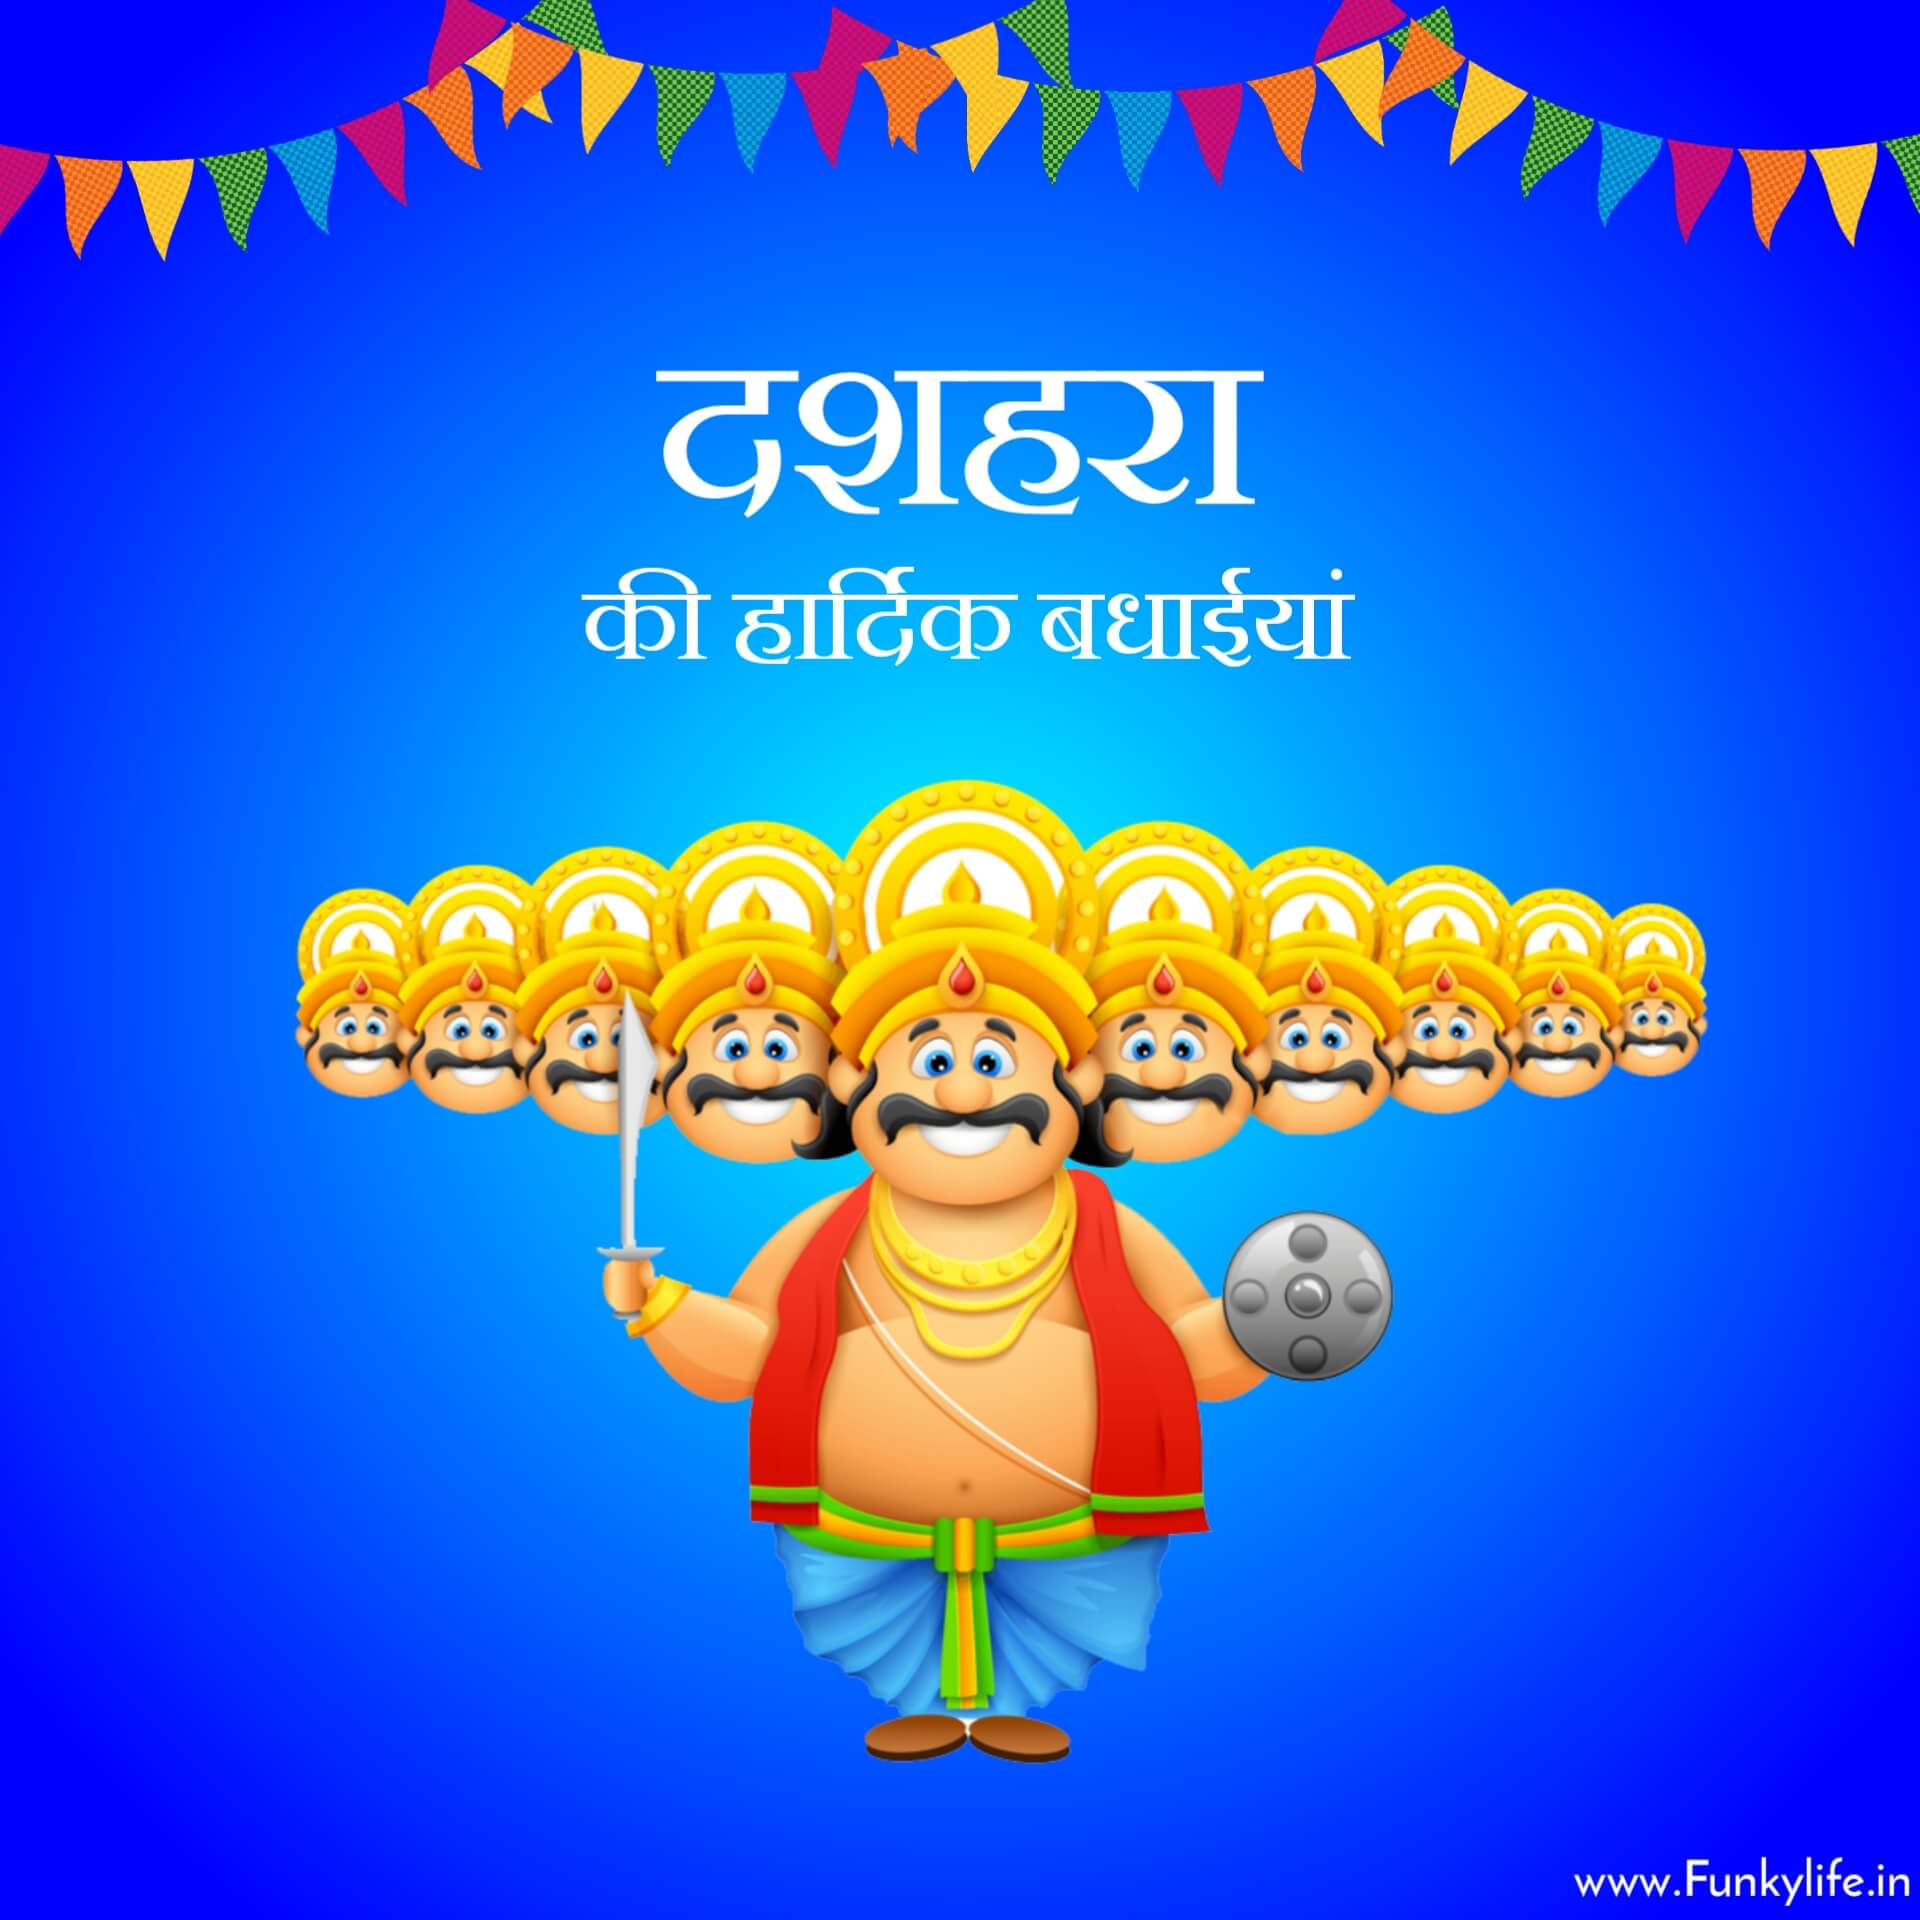 Dussehra wishes in Hindi